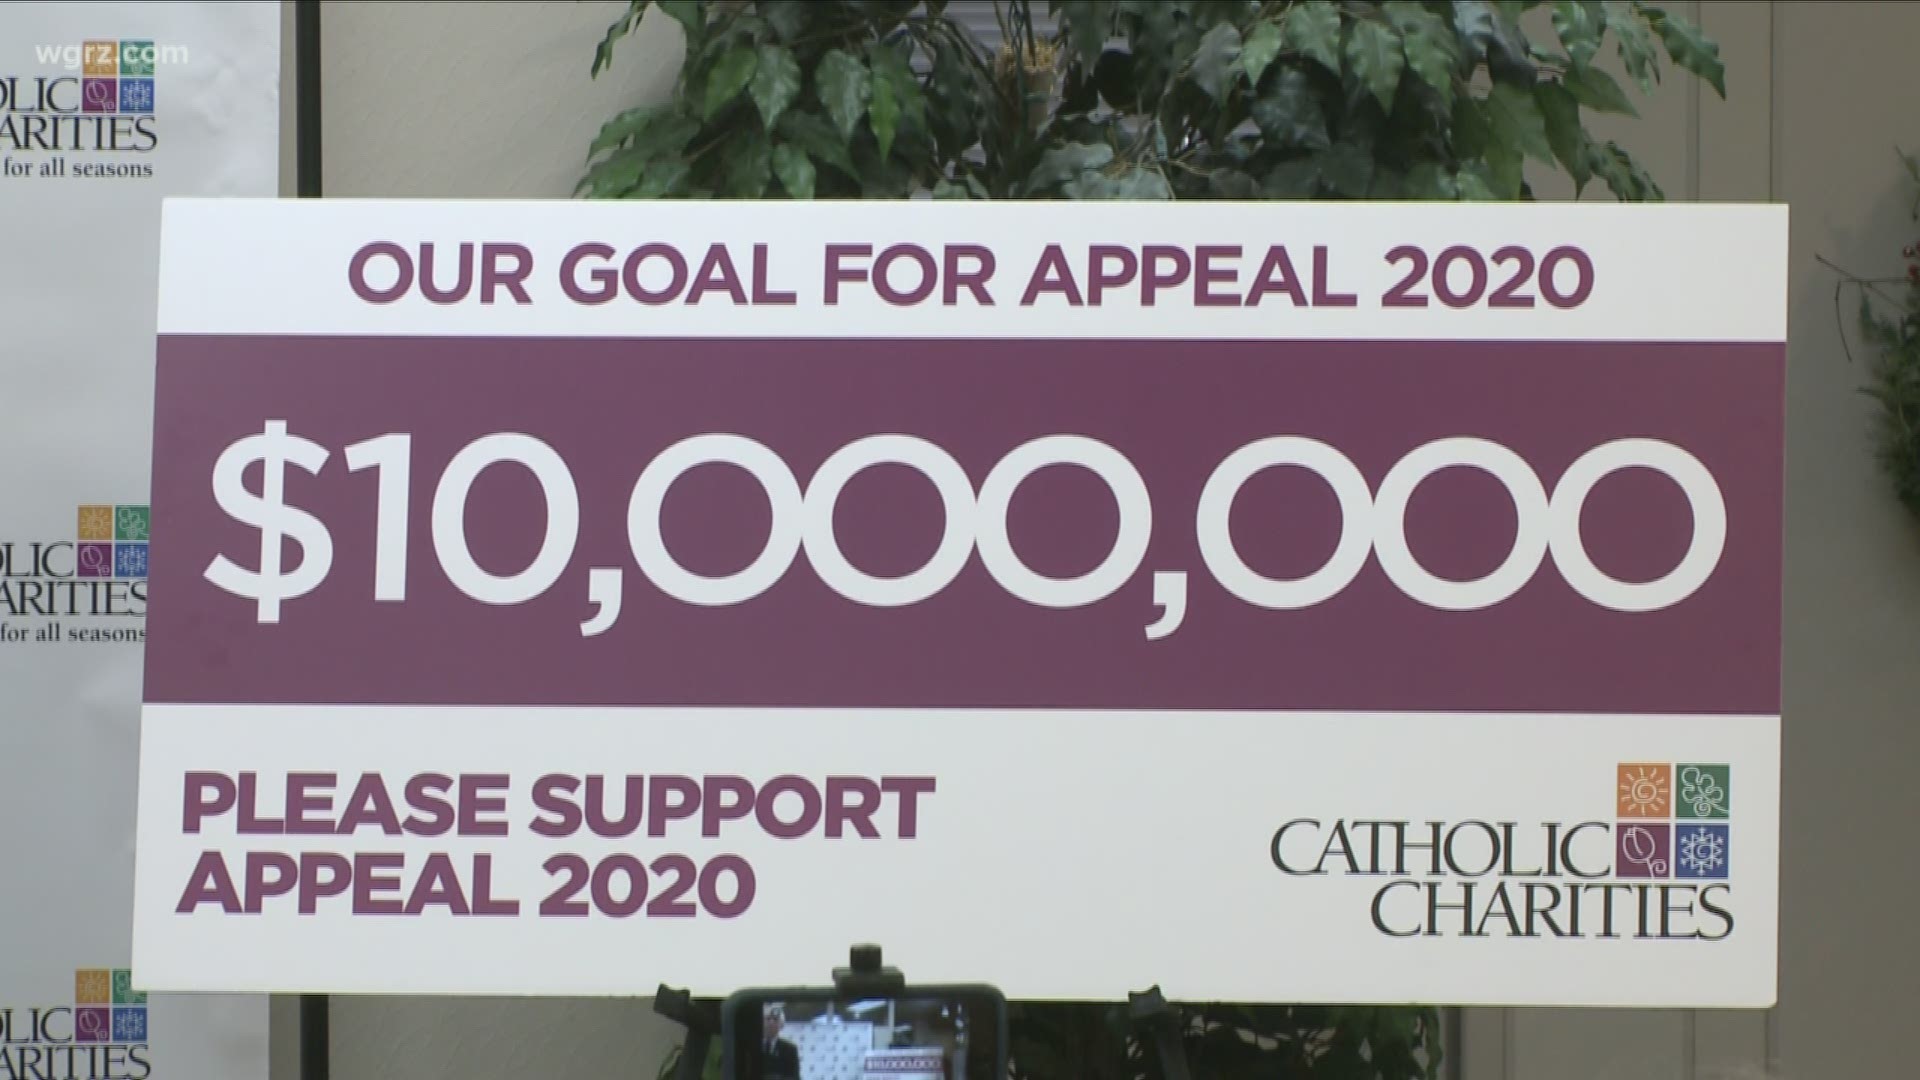 Diocese officials are trying to alleviate lingering concerns about where the money donated will actually go... even with rumors of future bankruptcy.